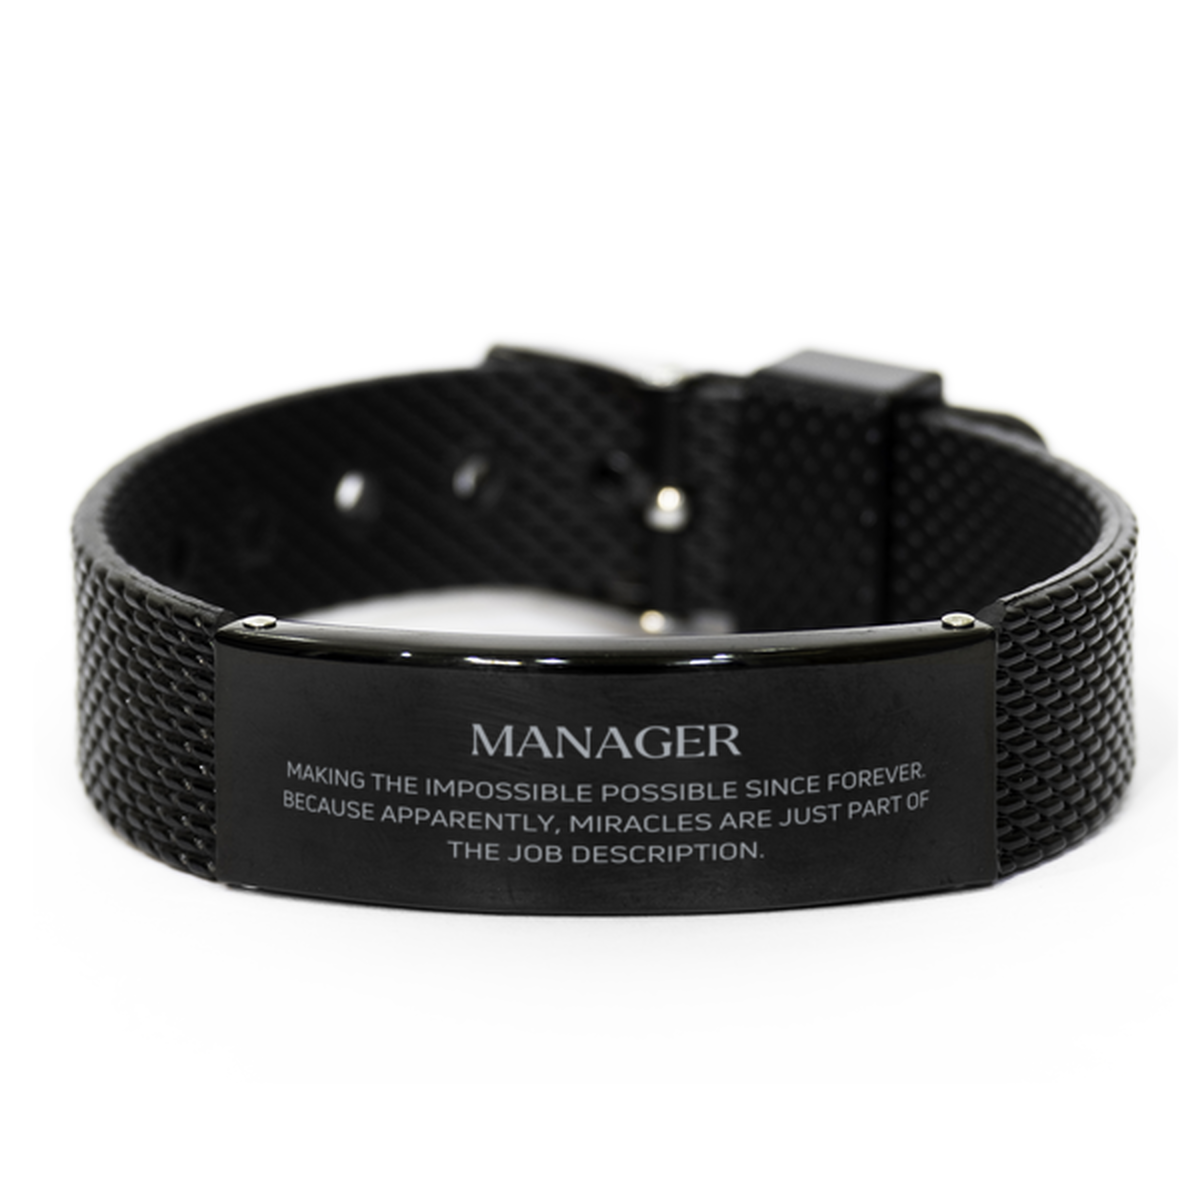 Funny Manager Gifts, Miracles are just part of the job description, Inspirational Birthday Black Shark Mesh Bracelet For Manager, Men, Women, Coworkers, Friends, Boss